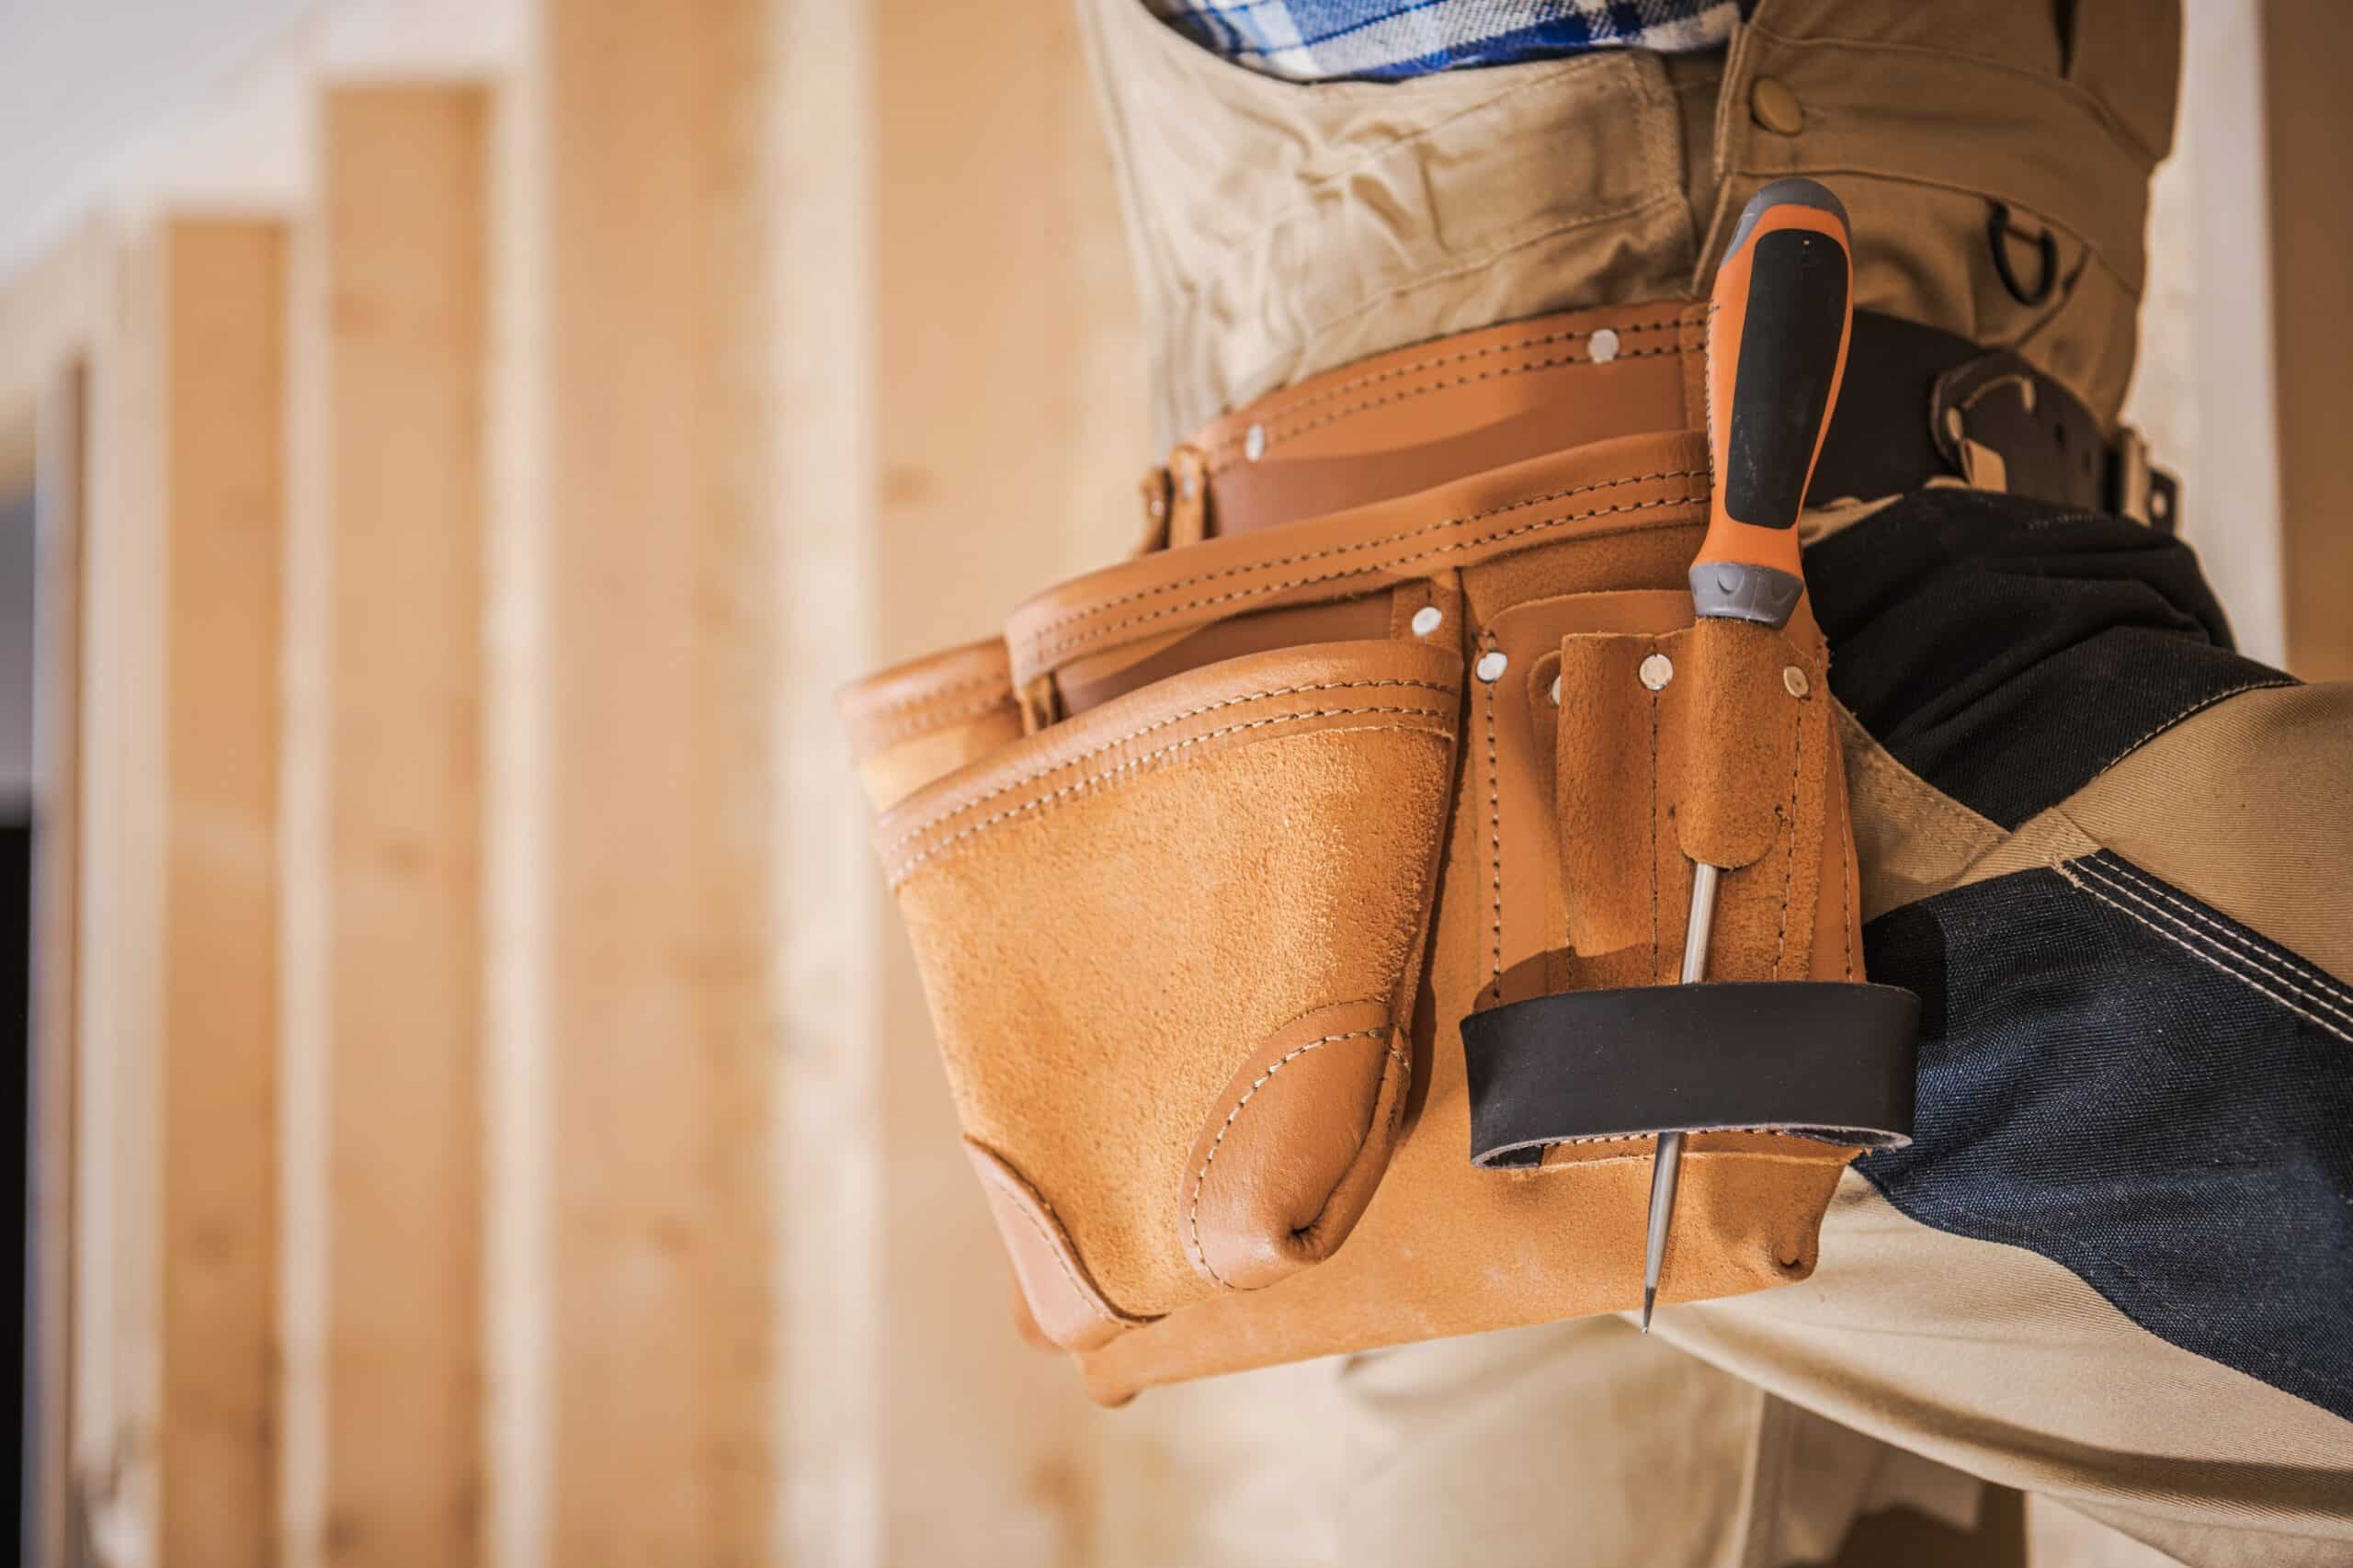 A home improvement contractor's tool belt is visible as he works to renovate a home and dominate the competition your market.